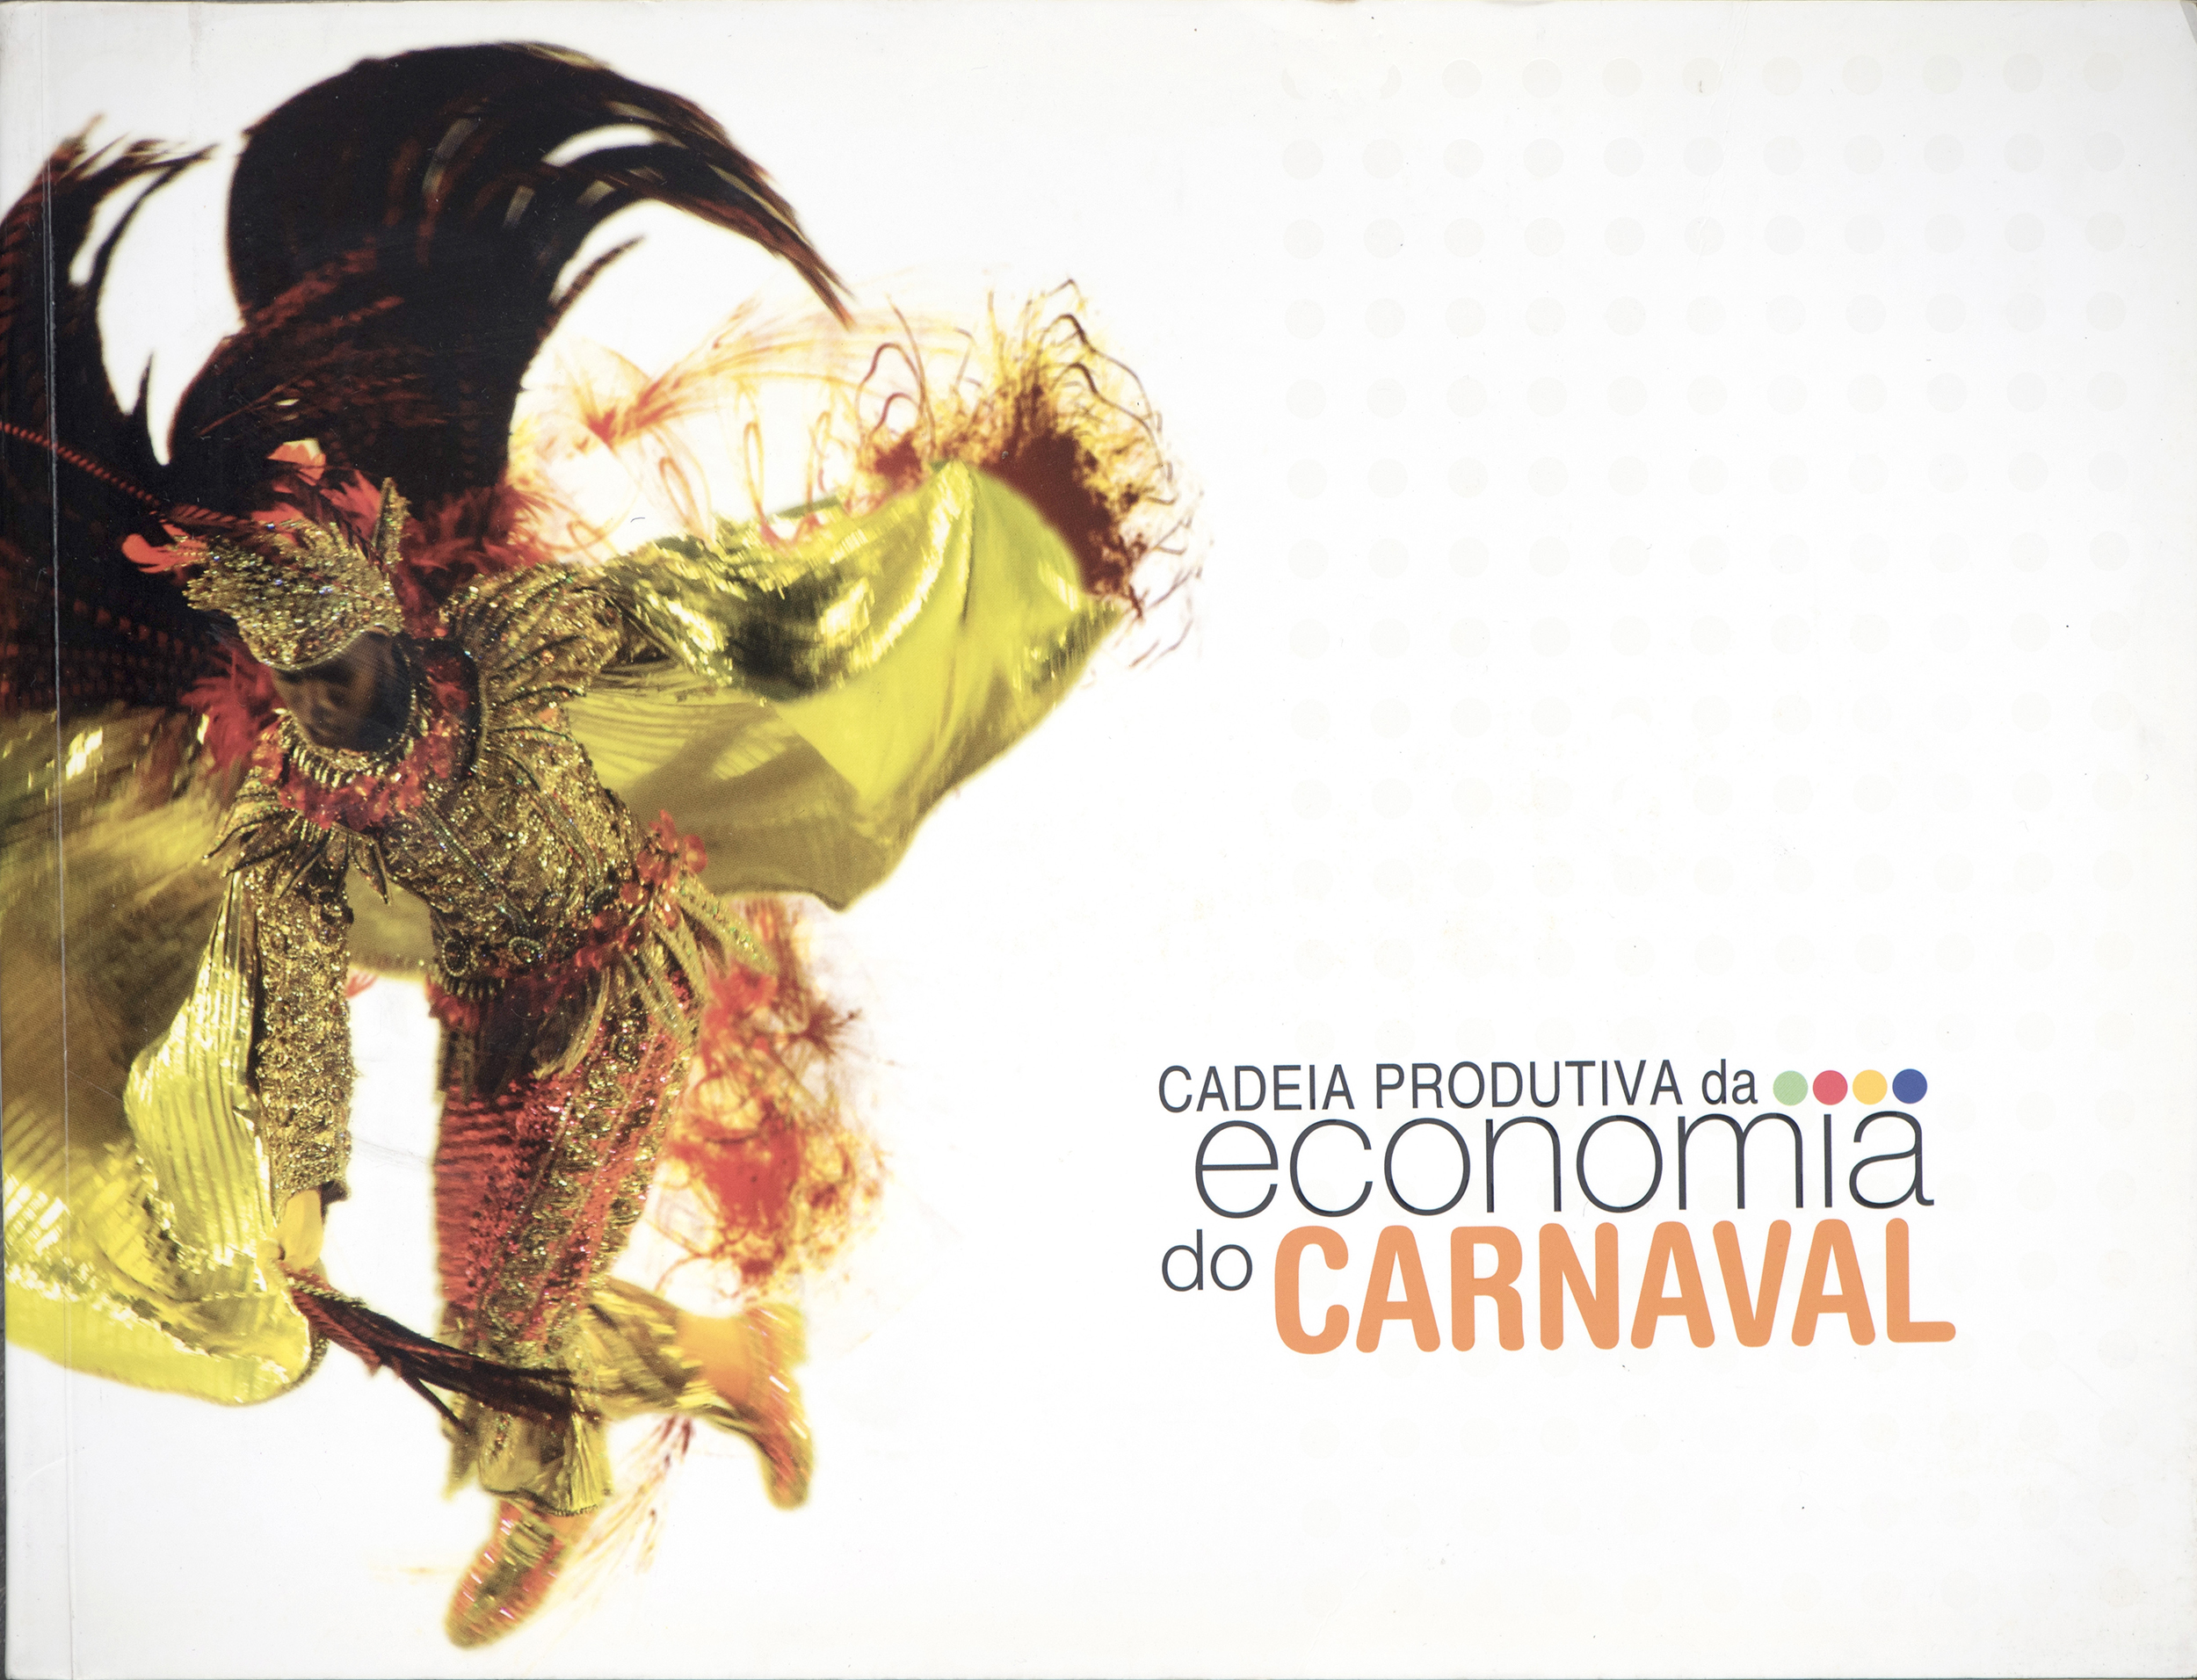 Carnaval's Economy, e-papers, Brazil 2009